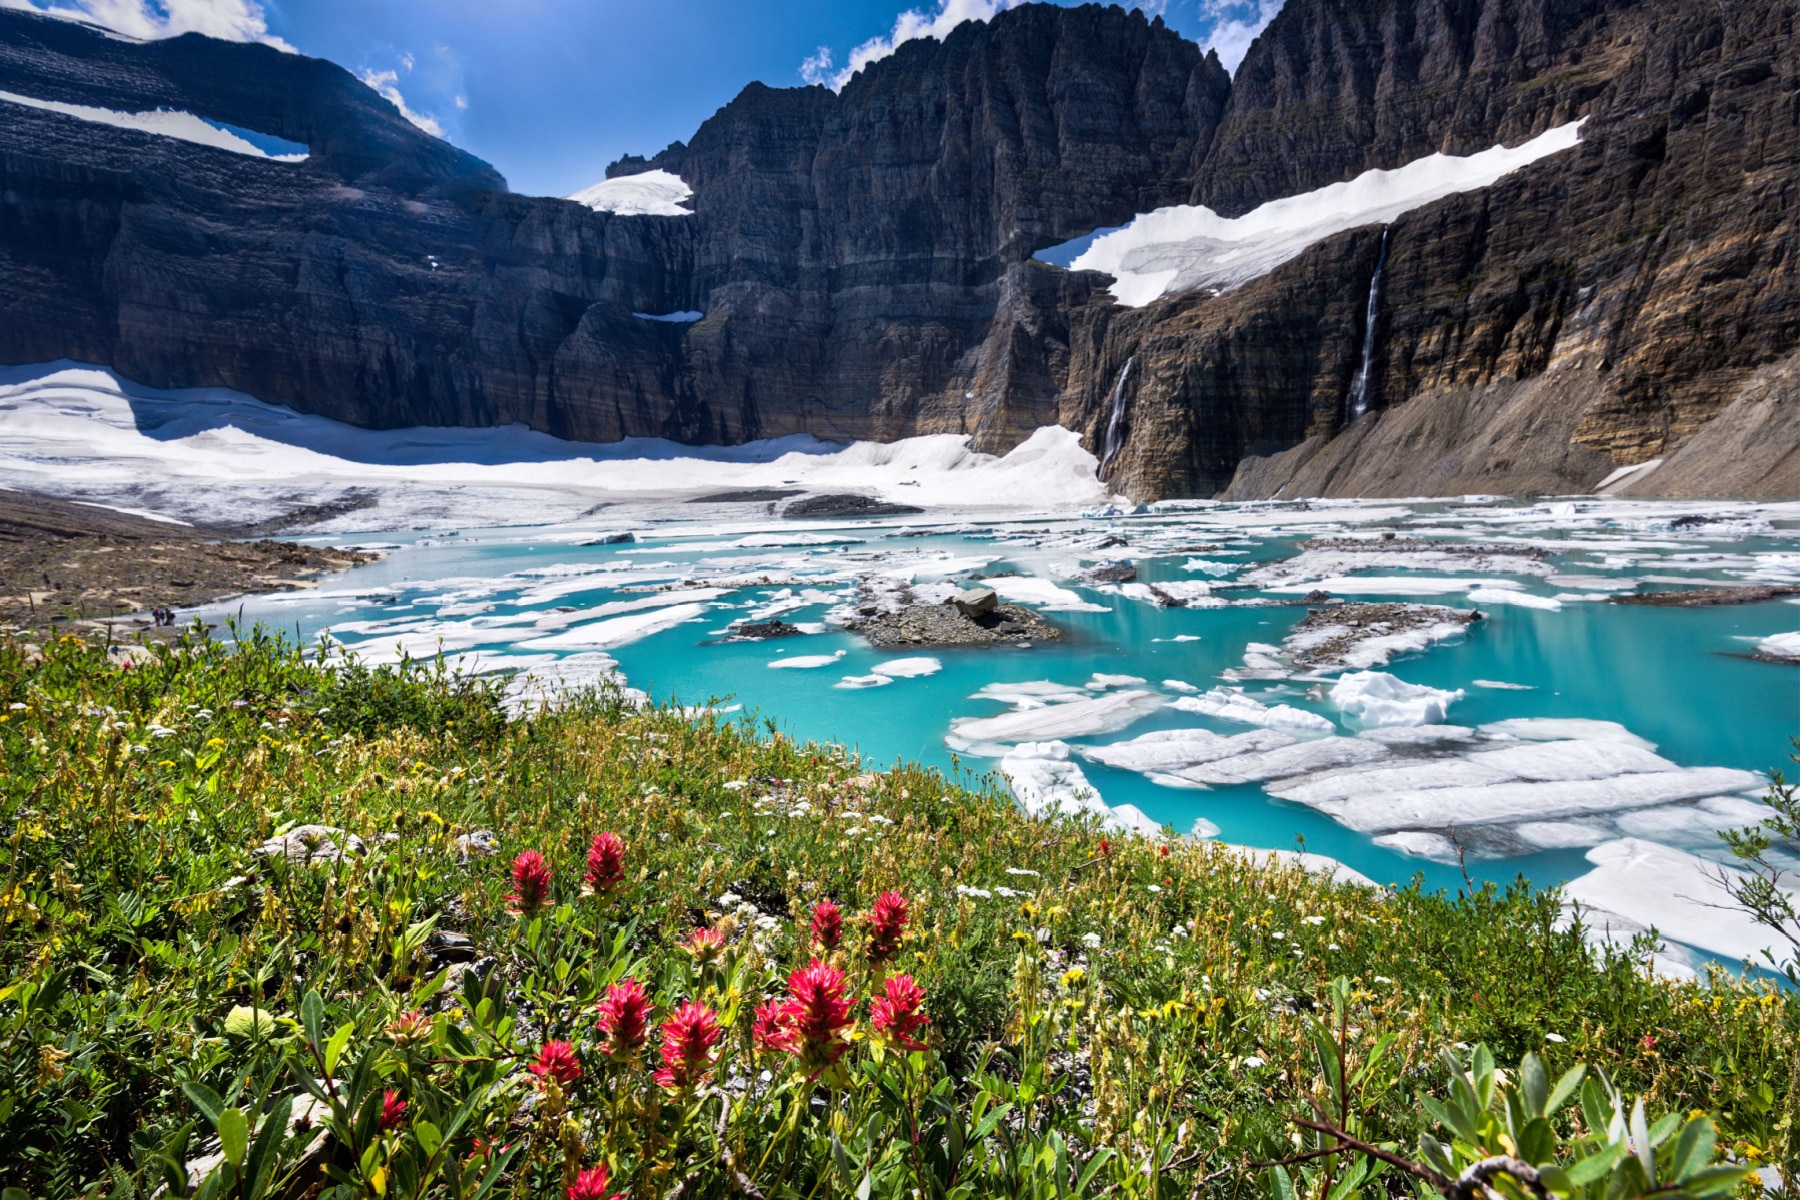 Grinnell Glacier with alpine lake and mountains above. Wildflowers grow in the foreground.